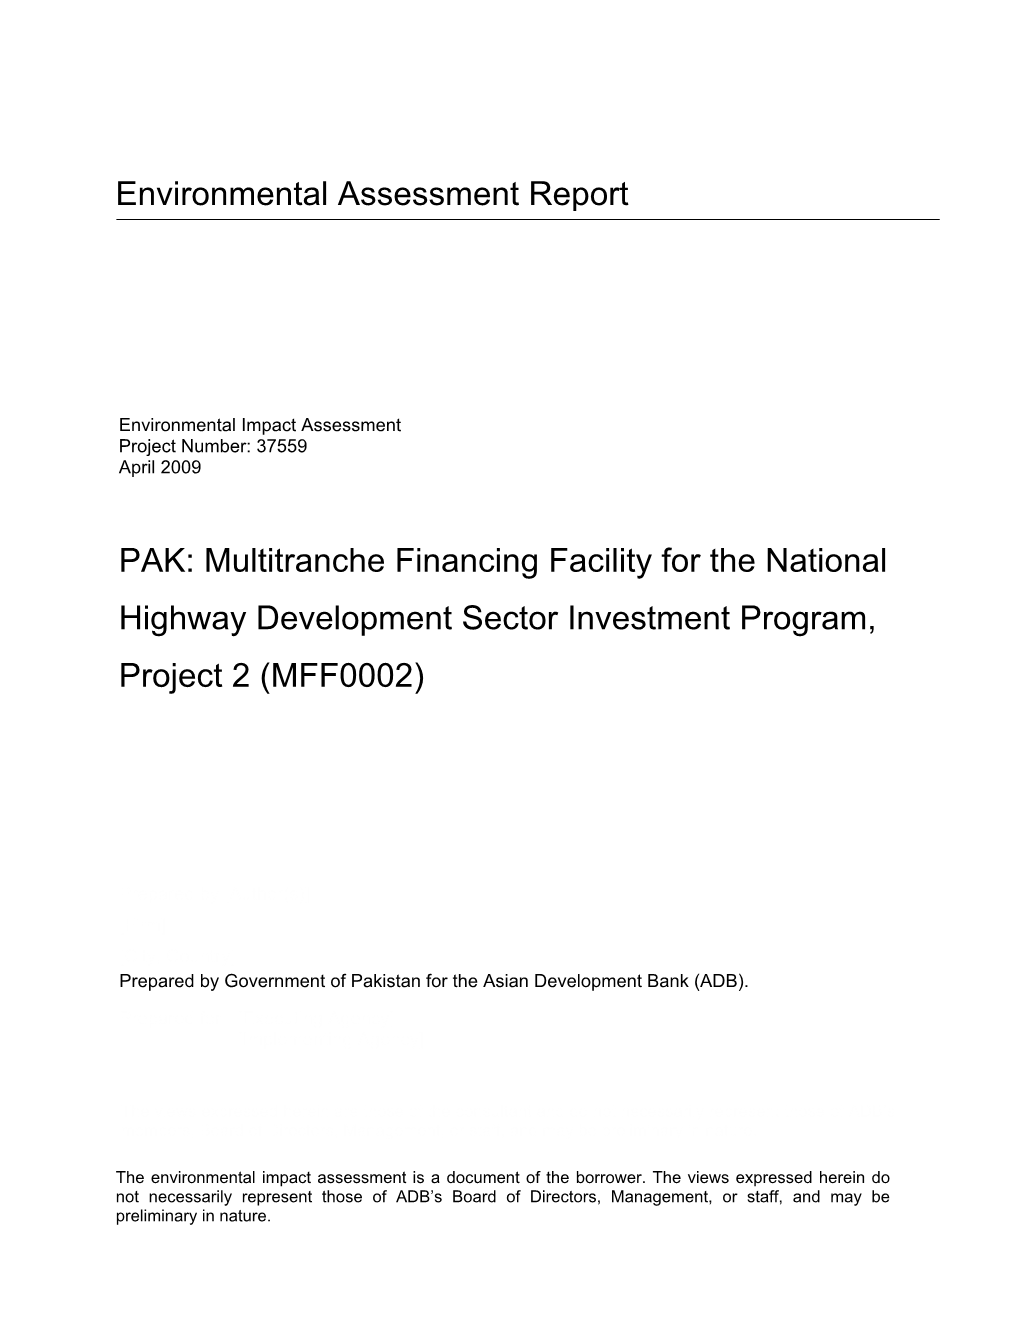 Multitranche Financing Facility for the National Highway Development Sector Investment Program, Project 2 (MFF0002)